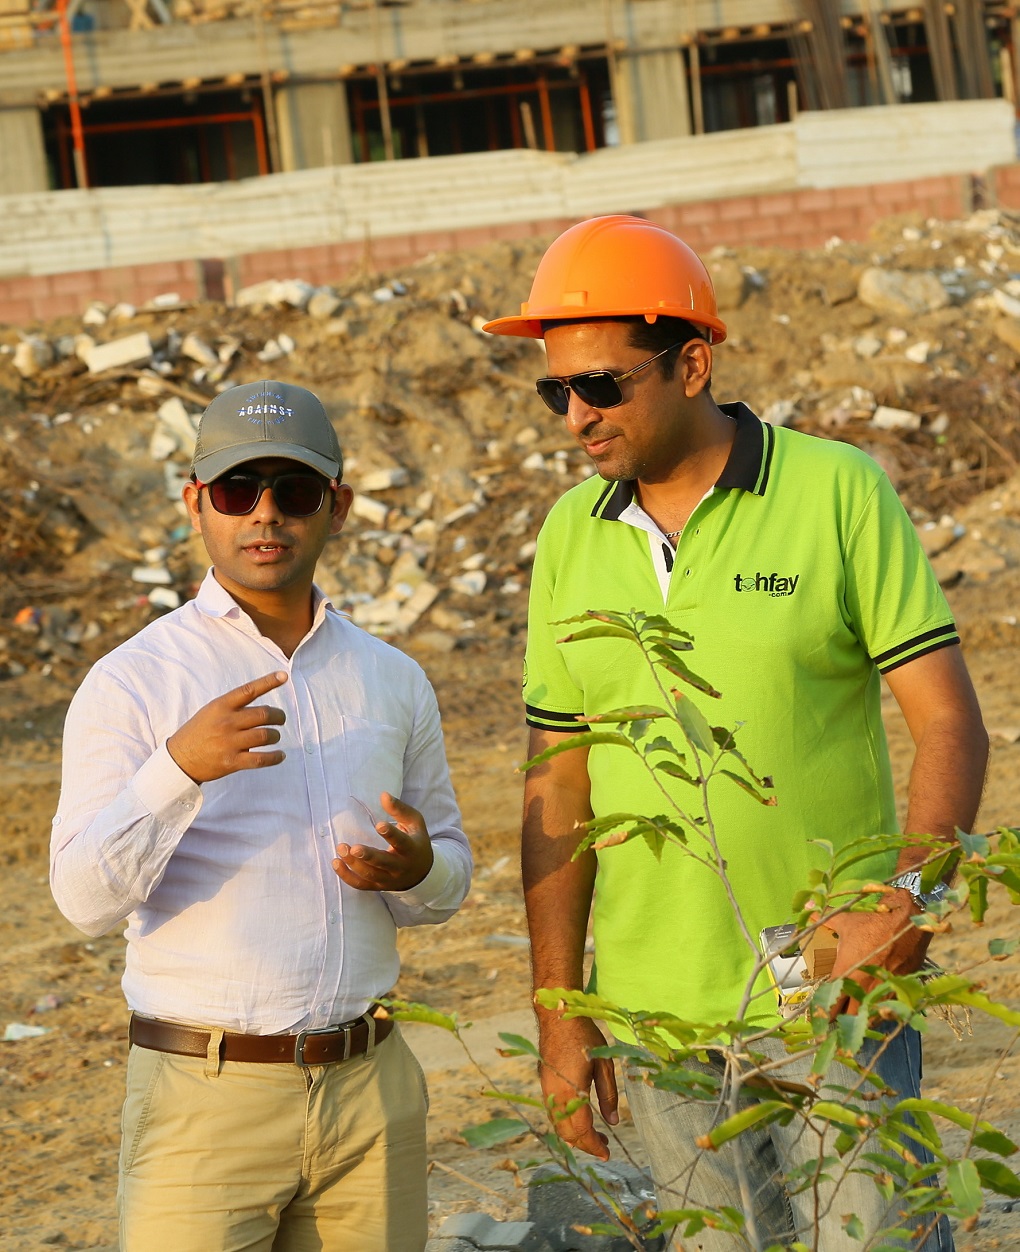 Shubendhu Sharma (left) and Shahzad Qureshi (right) discussing the design of the urban forest to be created in Karachi [image by: Urban Forest]